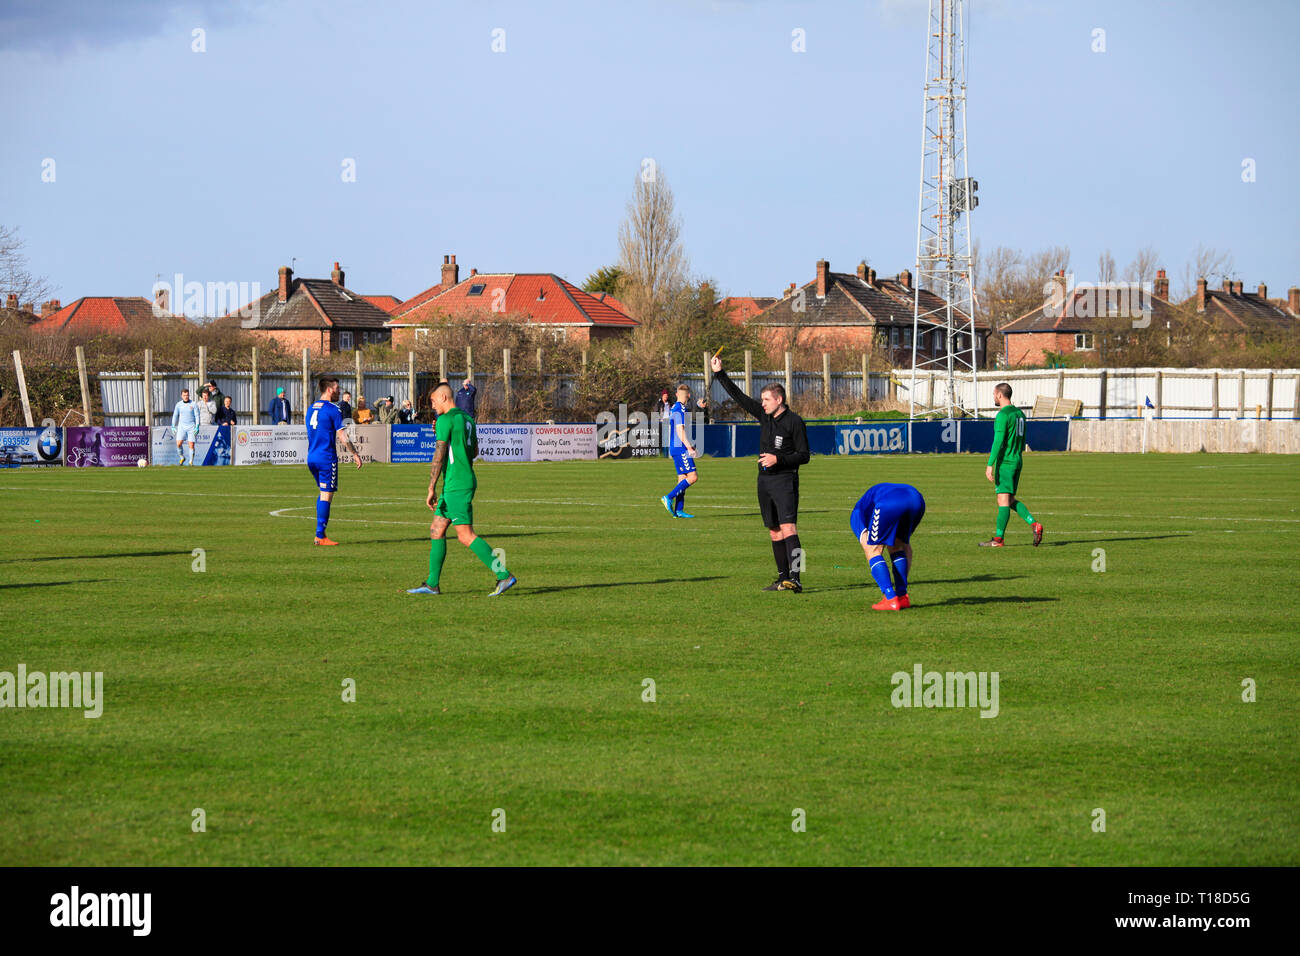 Local amateur football match between Billingham Town and Easington Colliery in north east England,UK. Referee shows yellow card to defender. Stock Photo